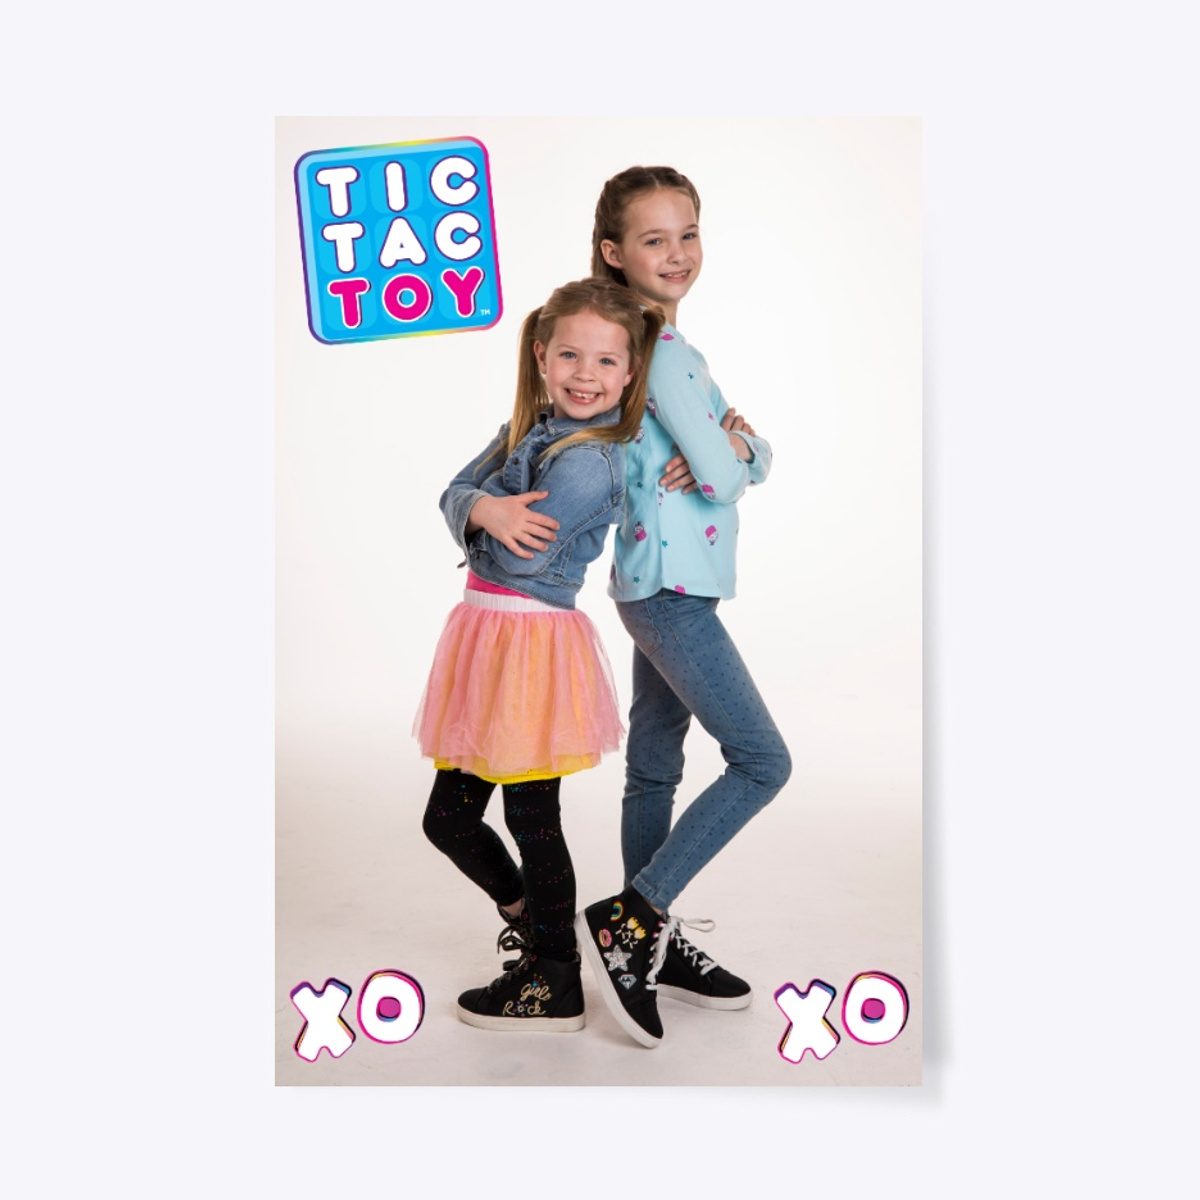 Tic Tac Toy Family (@tictactoyfamily) • Instagram photos and videos